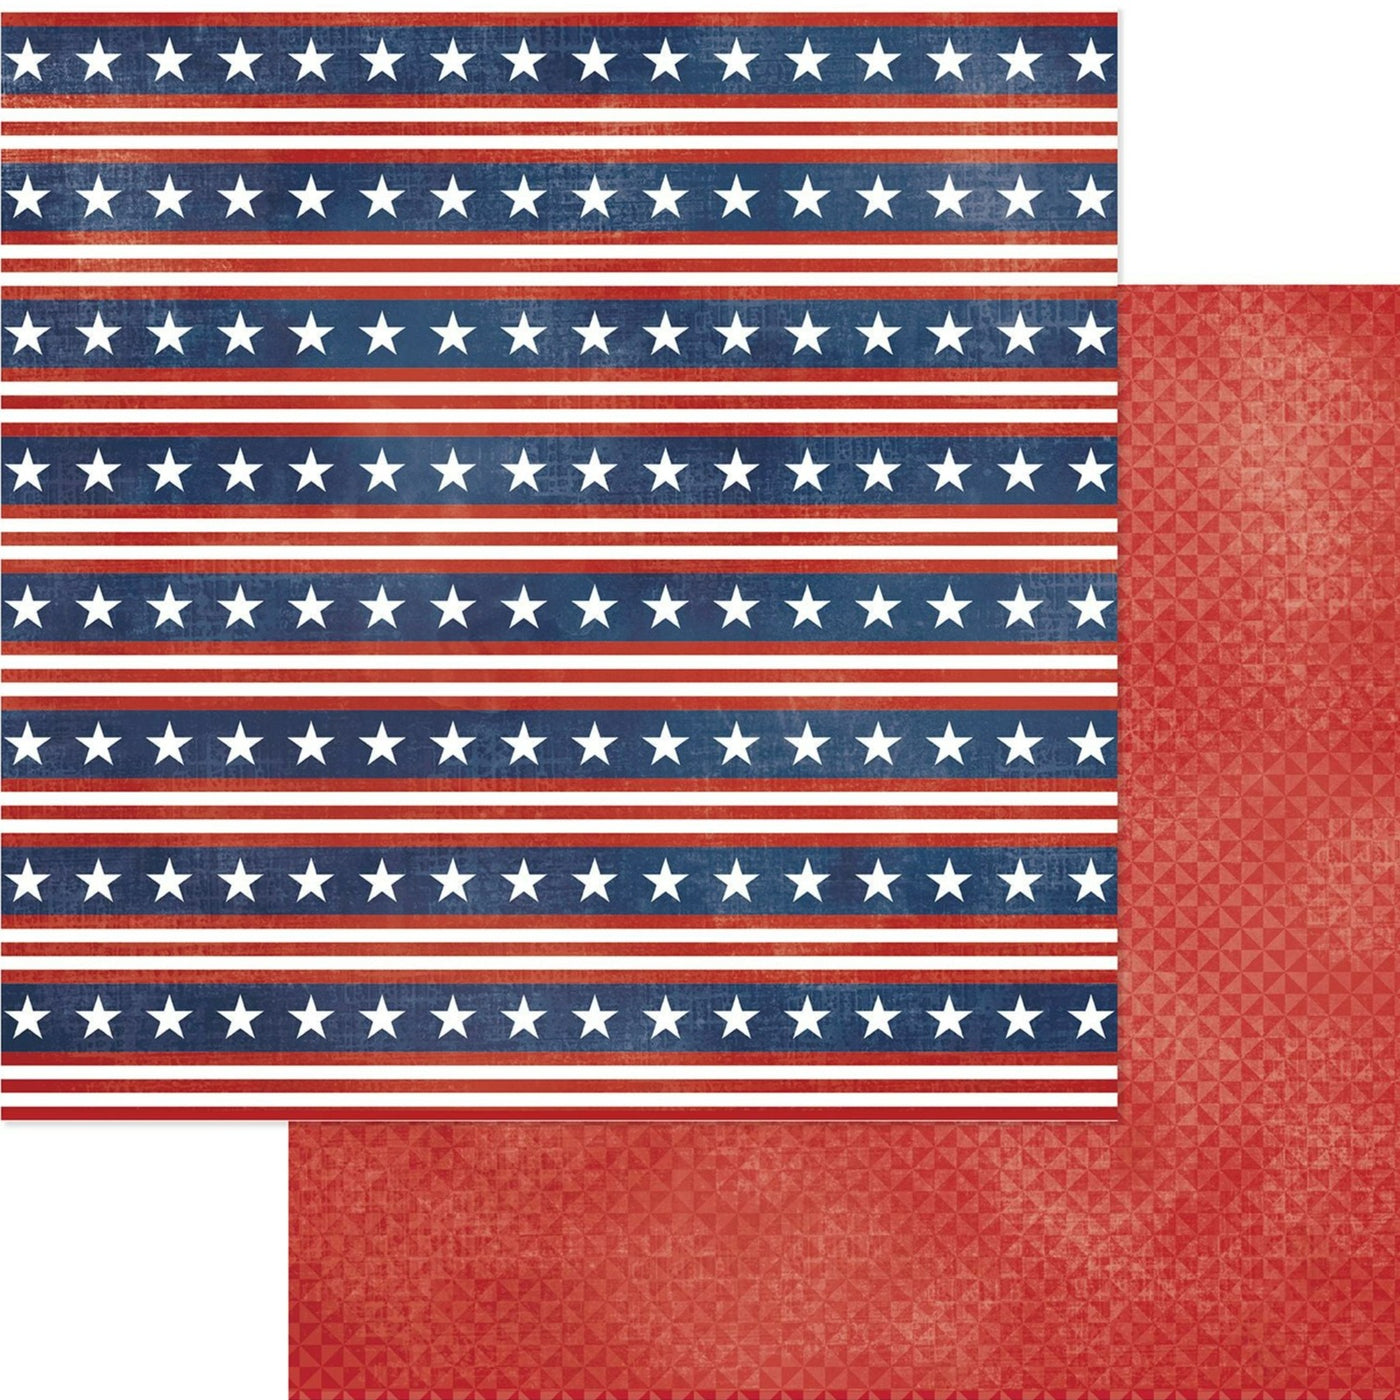 12x12 double-sided patterned paper. (Side A - thick blue stripes with stars and thin red and white stripes alternating, Side B - small triangle pattern on a red background) - American Crafts